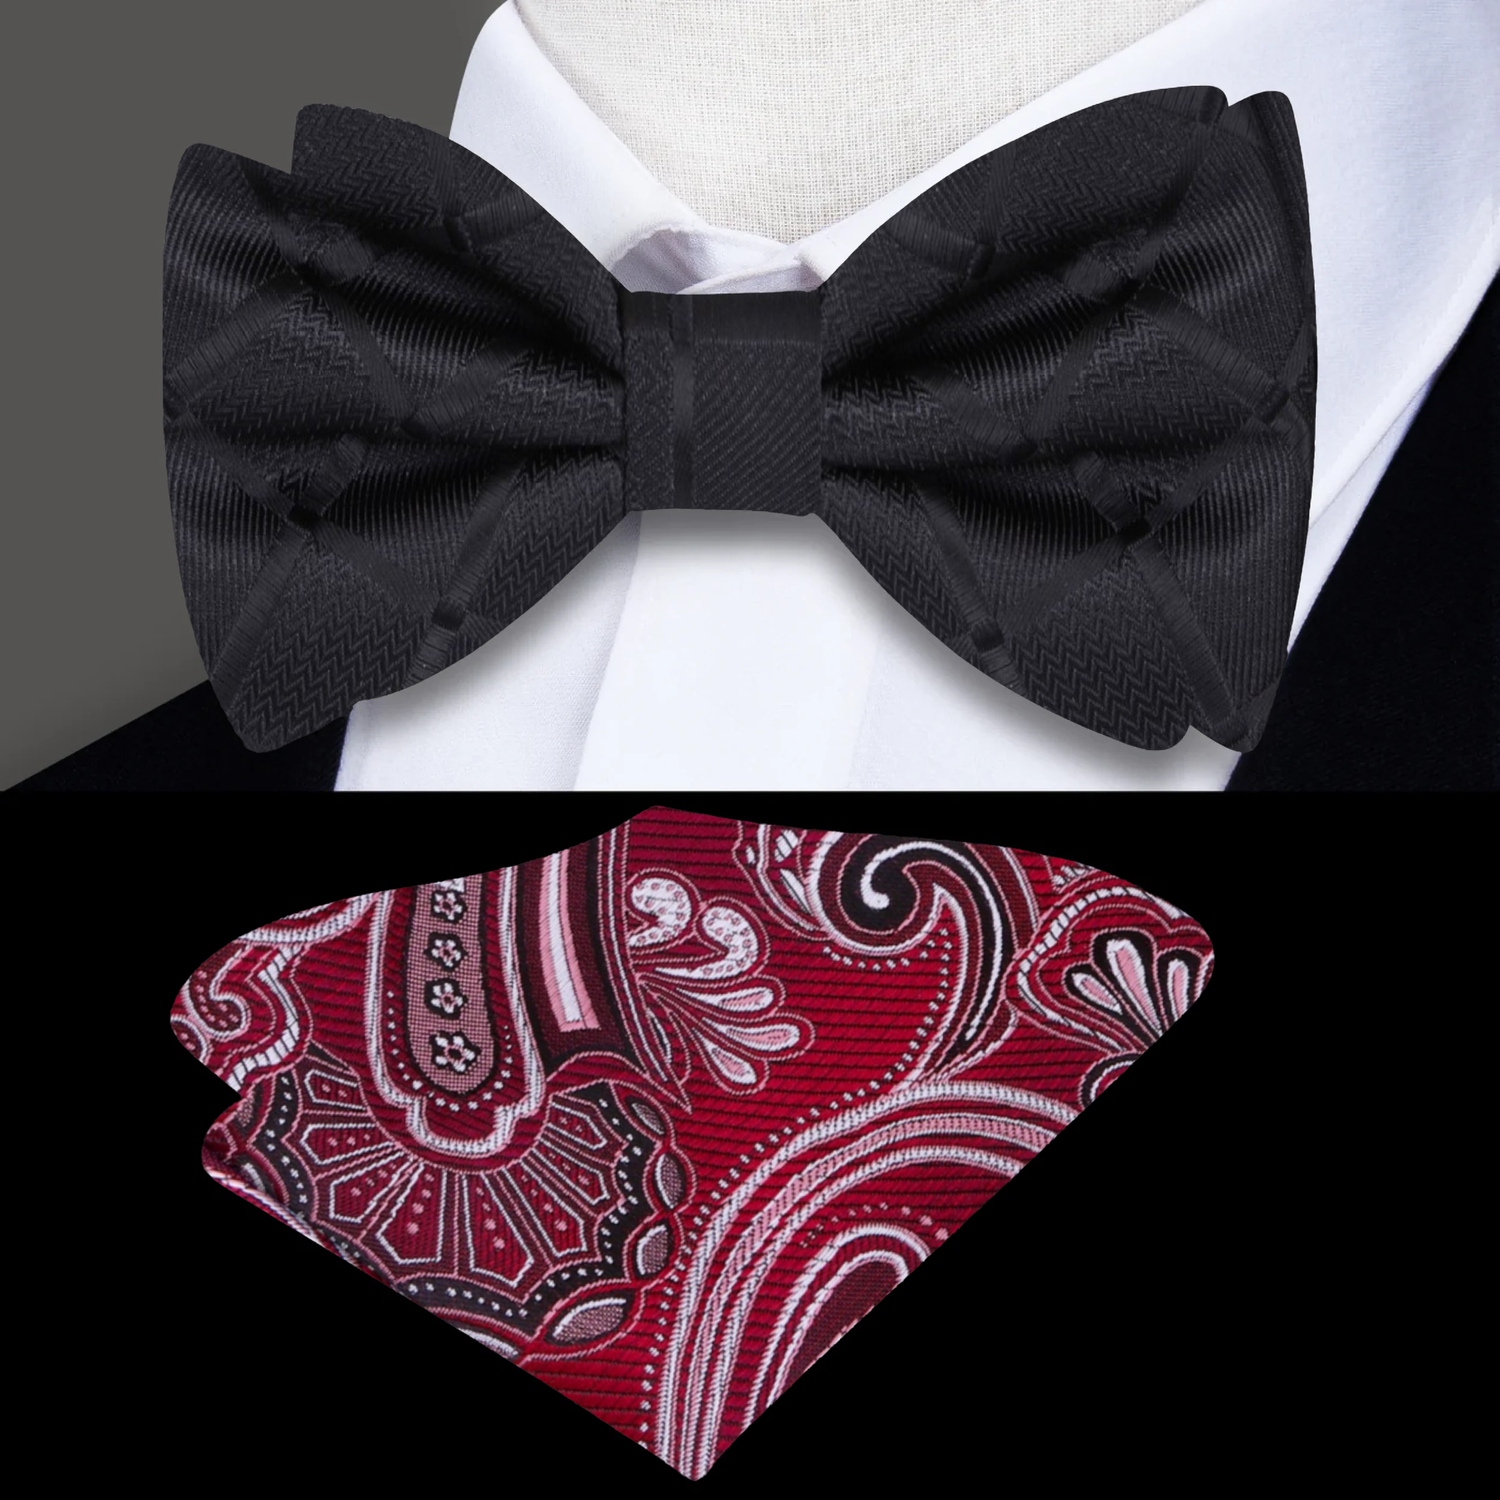 View 2: Black with Geometric Texture Bow Tie and Burgundy Paisley Pocket Square